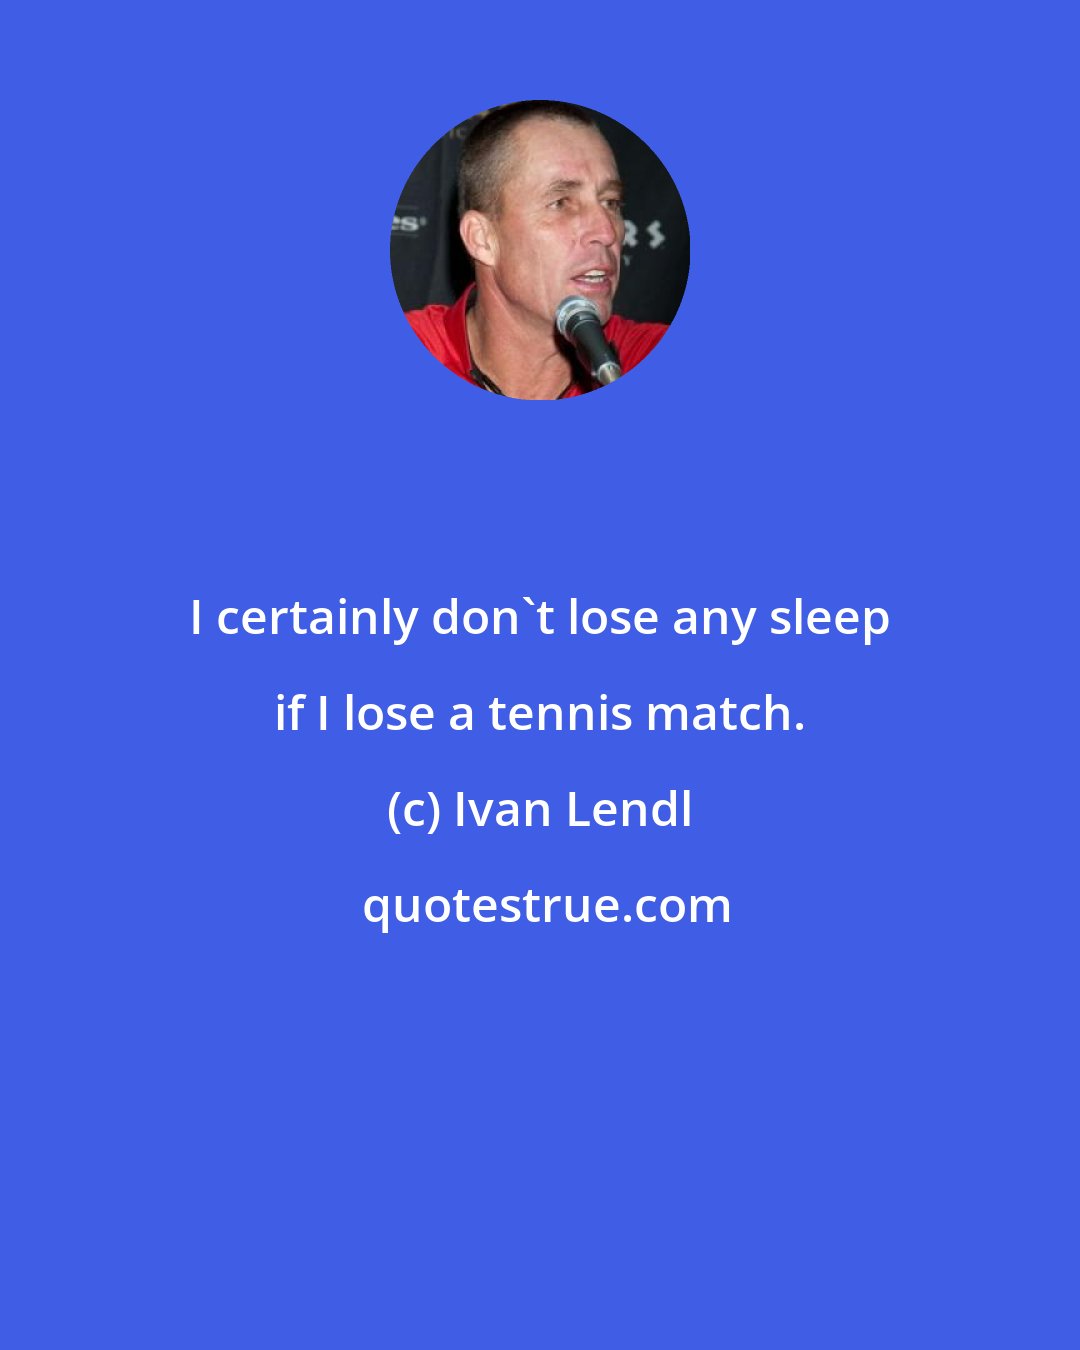 Ivan Lendl: I certainly don't lose any sleep if I lose a tennis match.